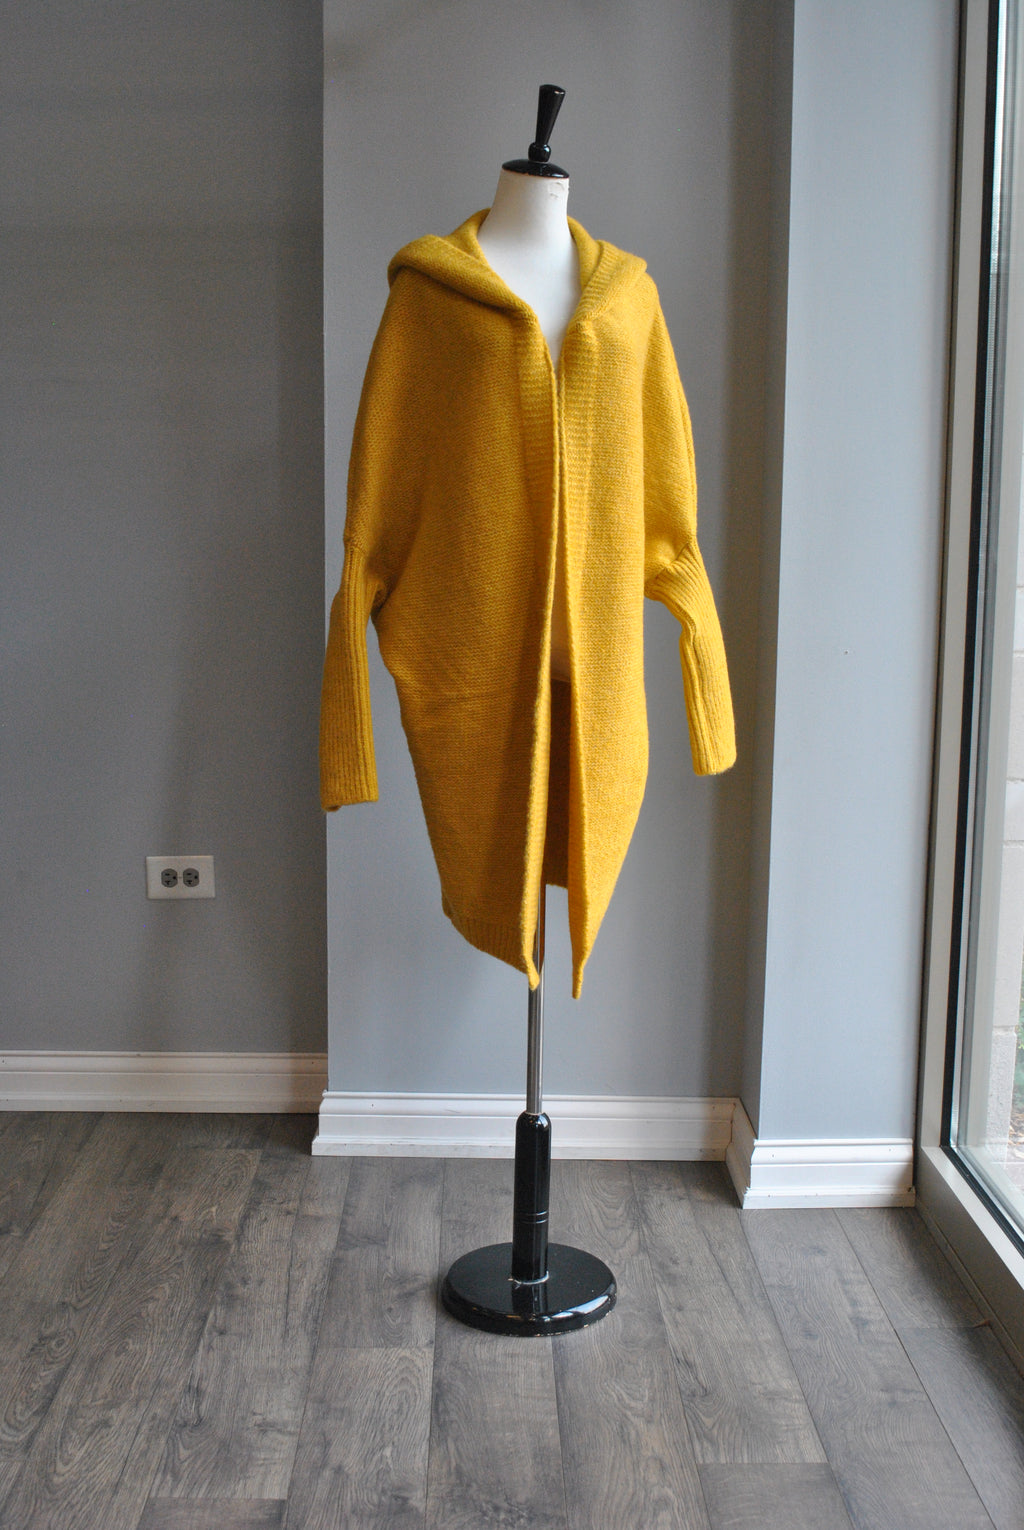 MUSTARD OPEN STYLE SWEATER WITH A HOODIE